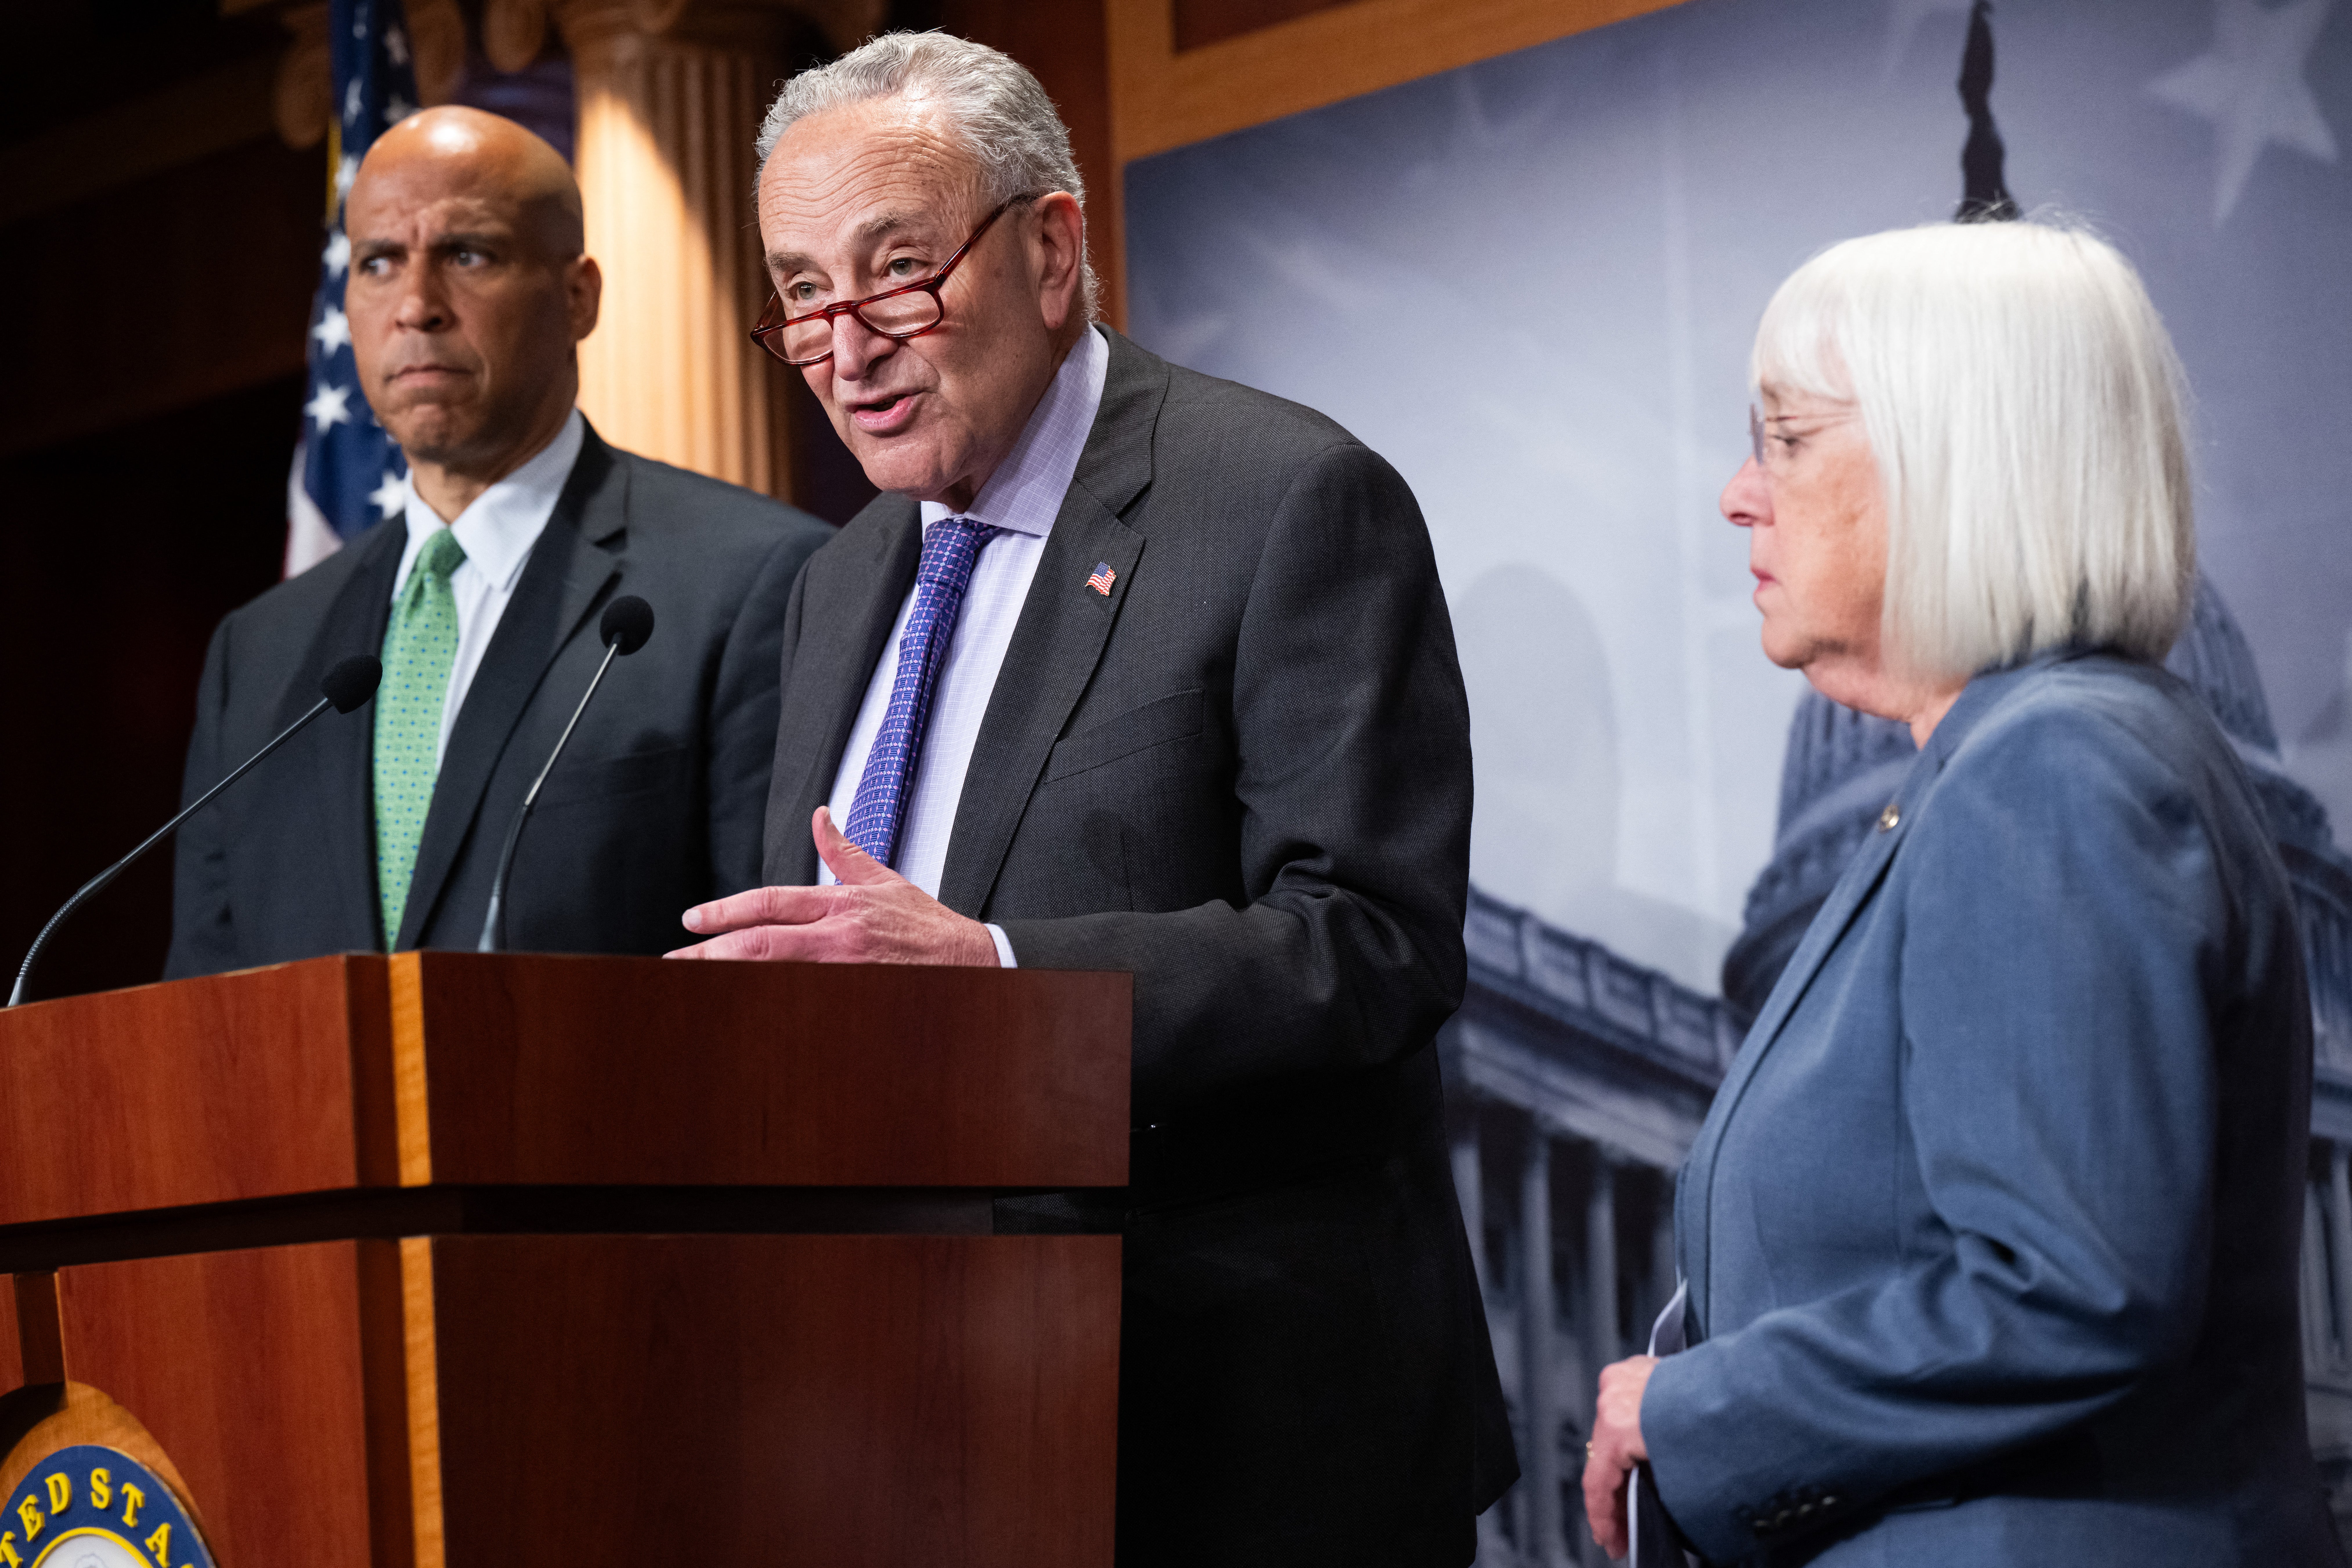 Cory Booker (left), Chuck Schumer (center) and Patty Murray (right) speak to reporters after Senate Republicans blocked IVF protections